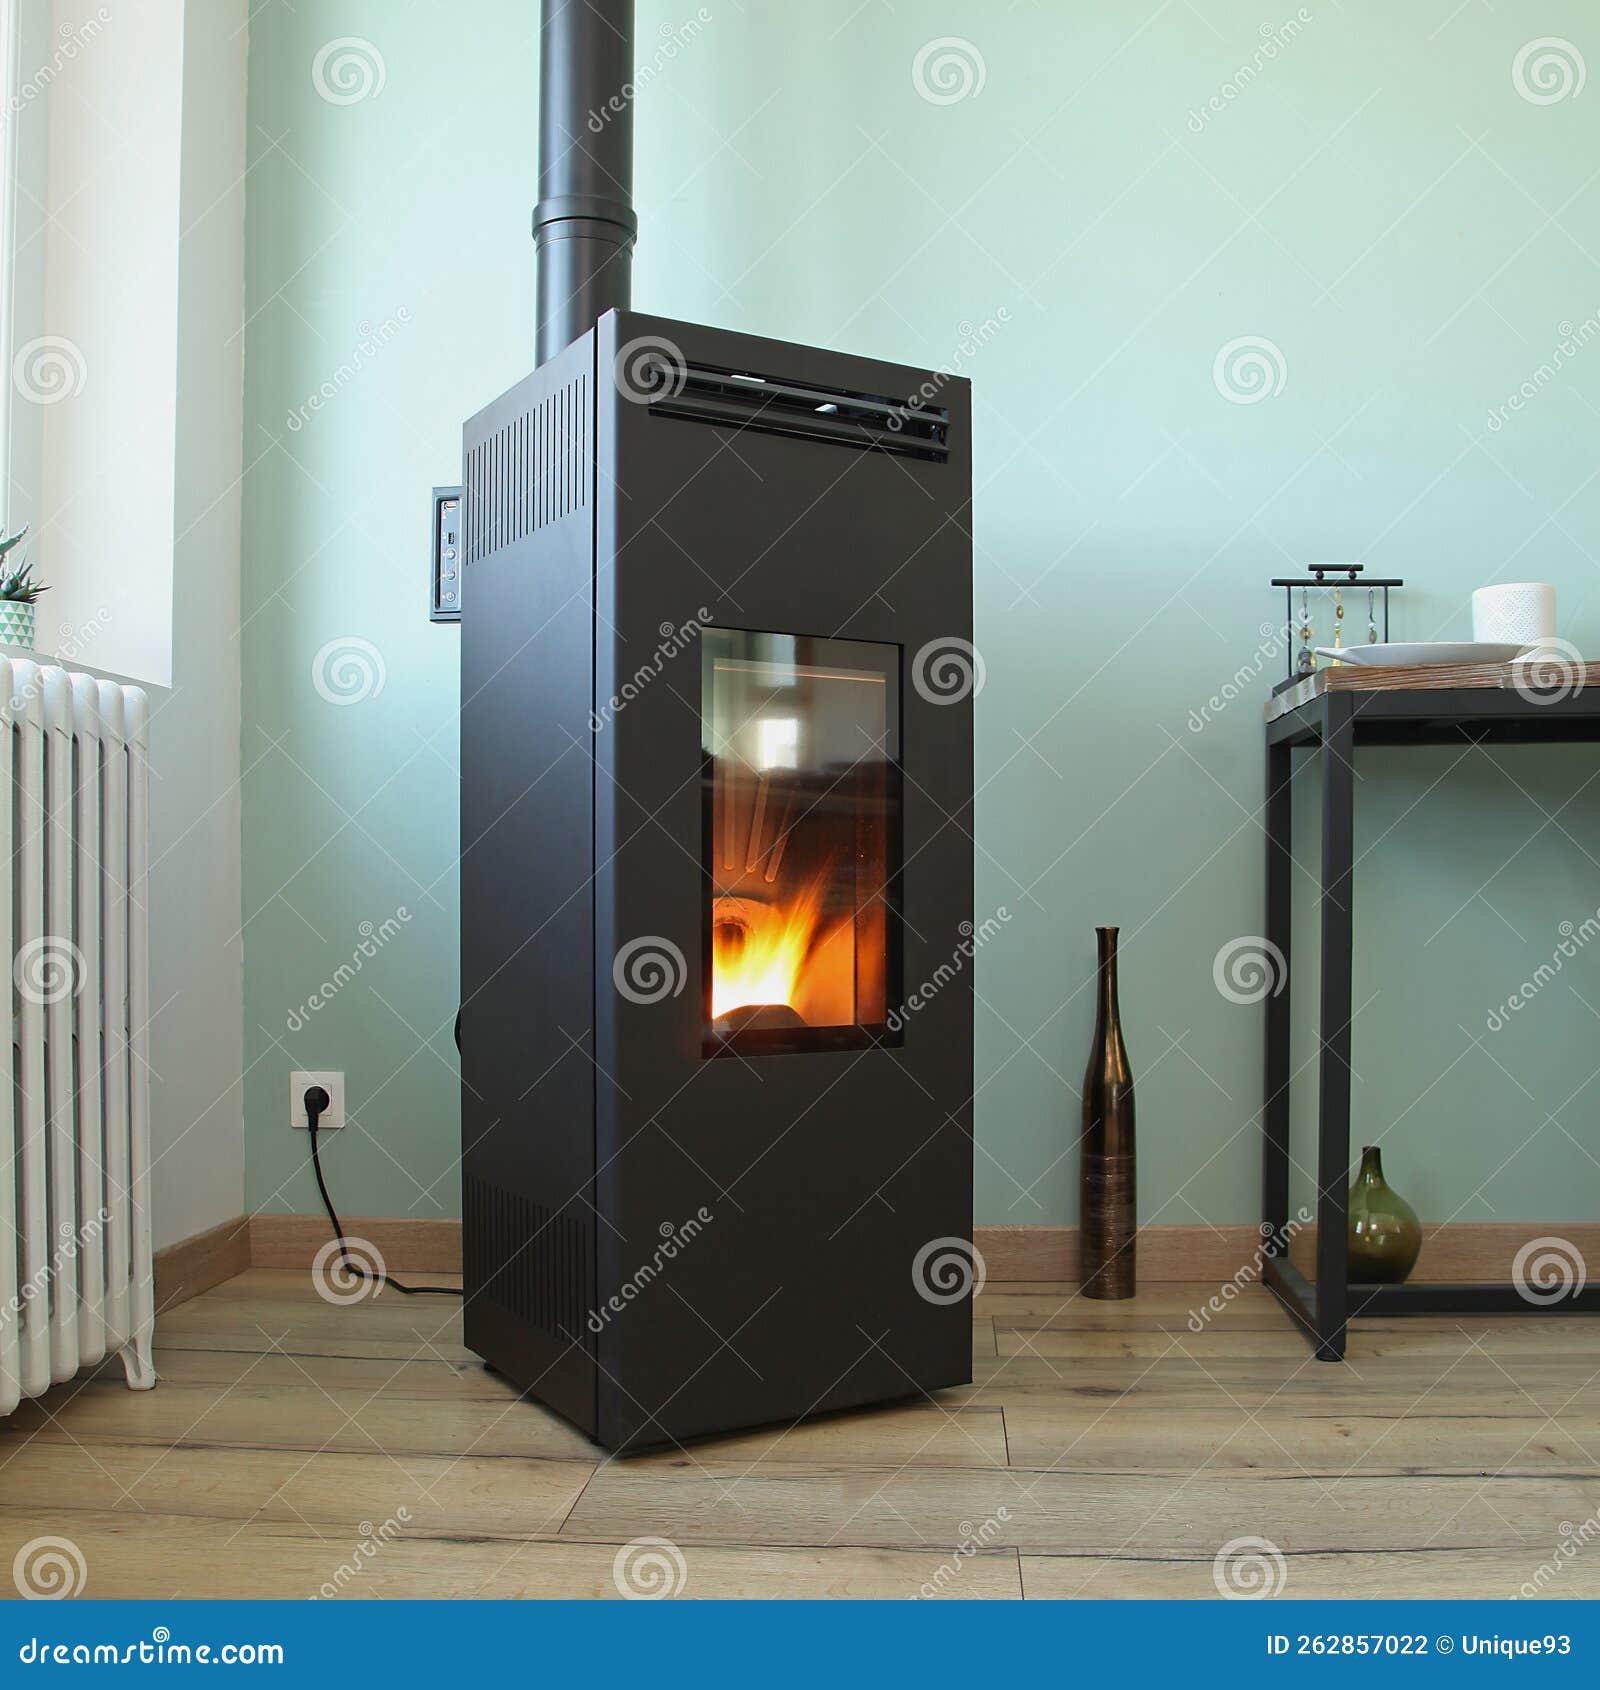 wood pellet stove as a heating supplement